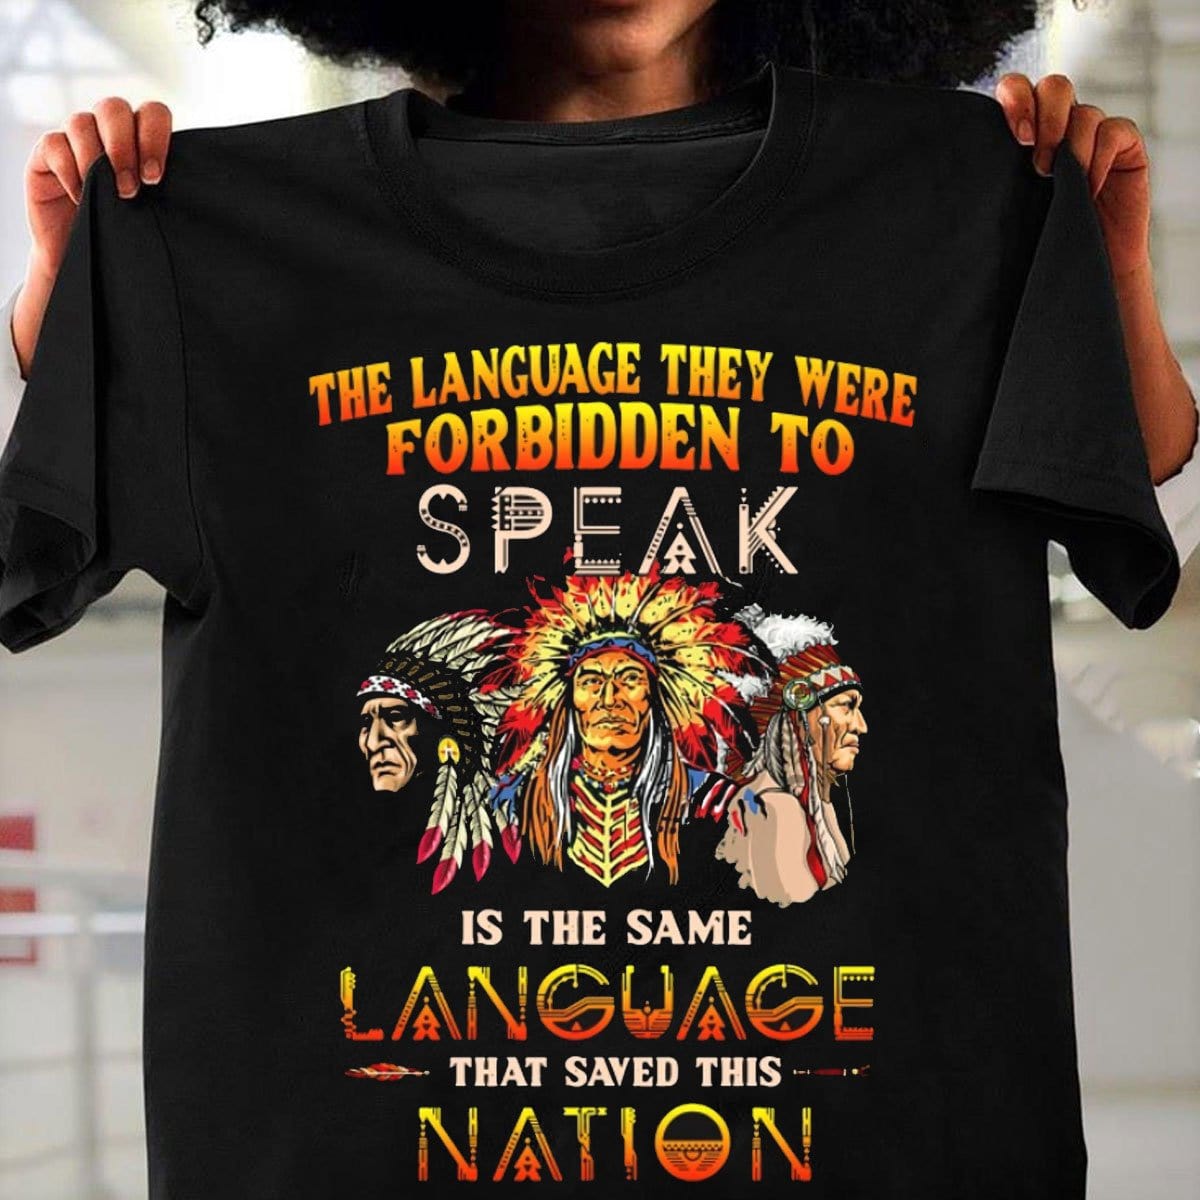 The Language They Were Forbidden To Speak, Native American Shirts